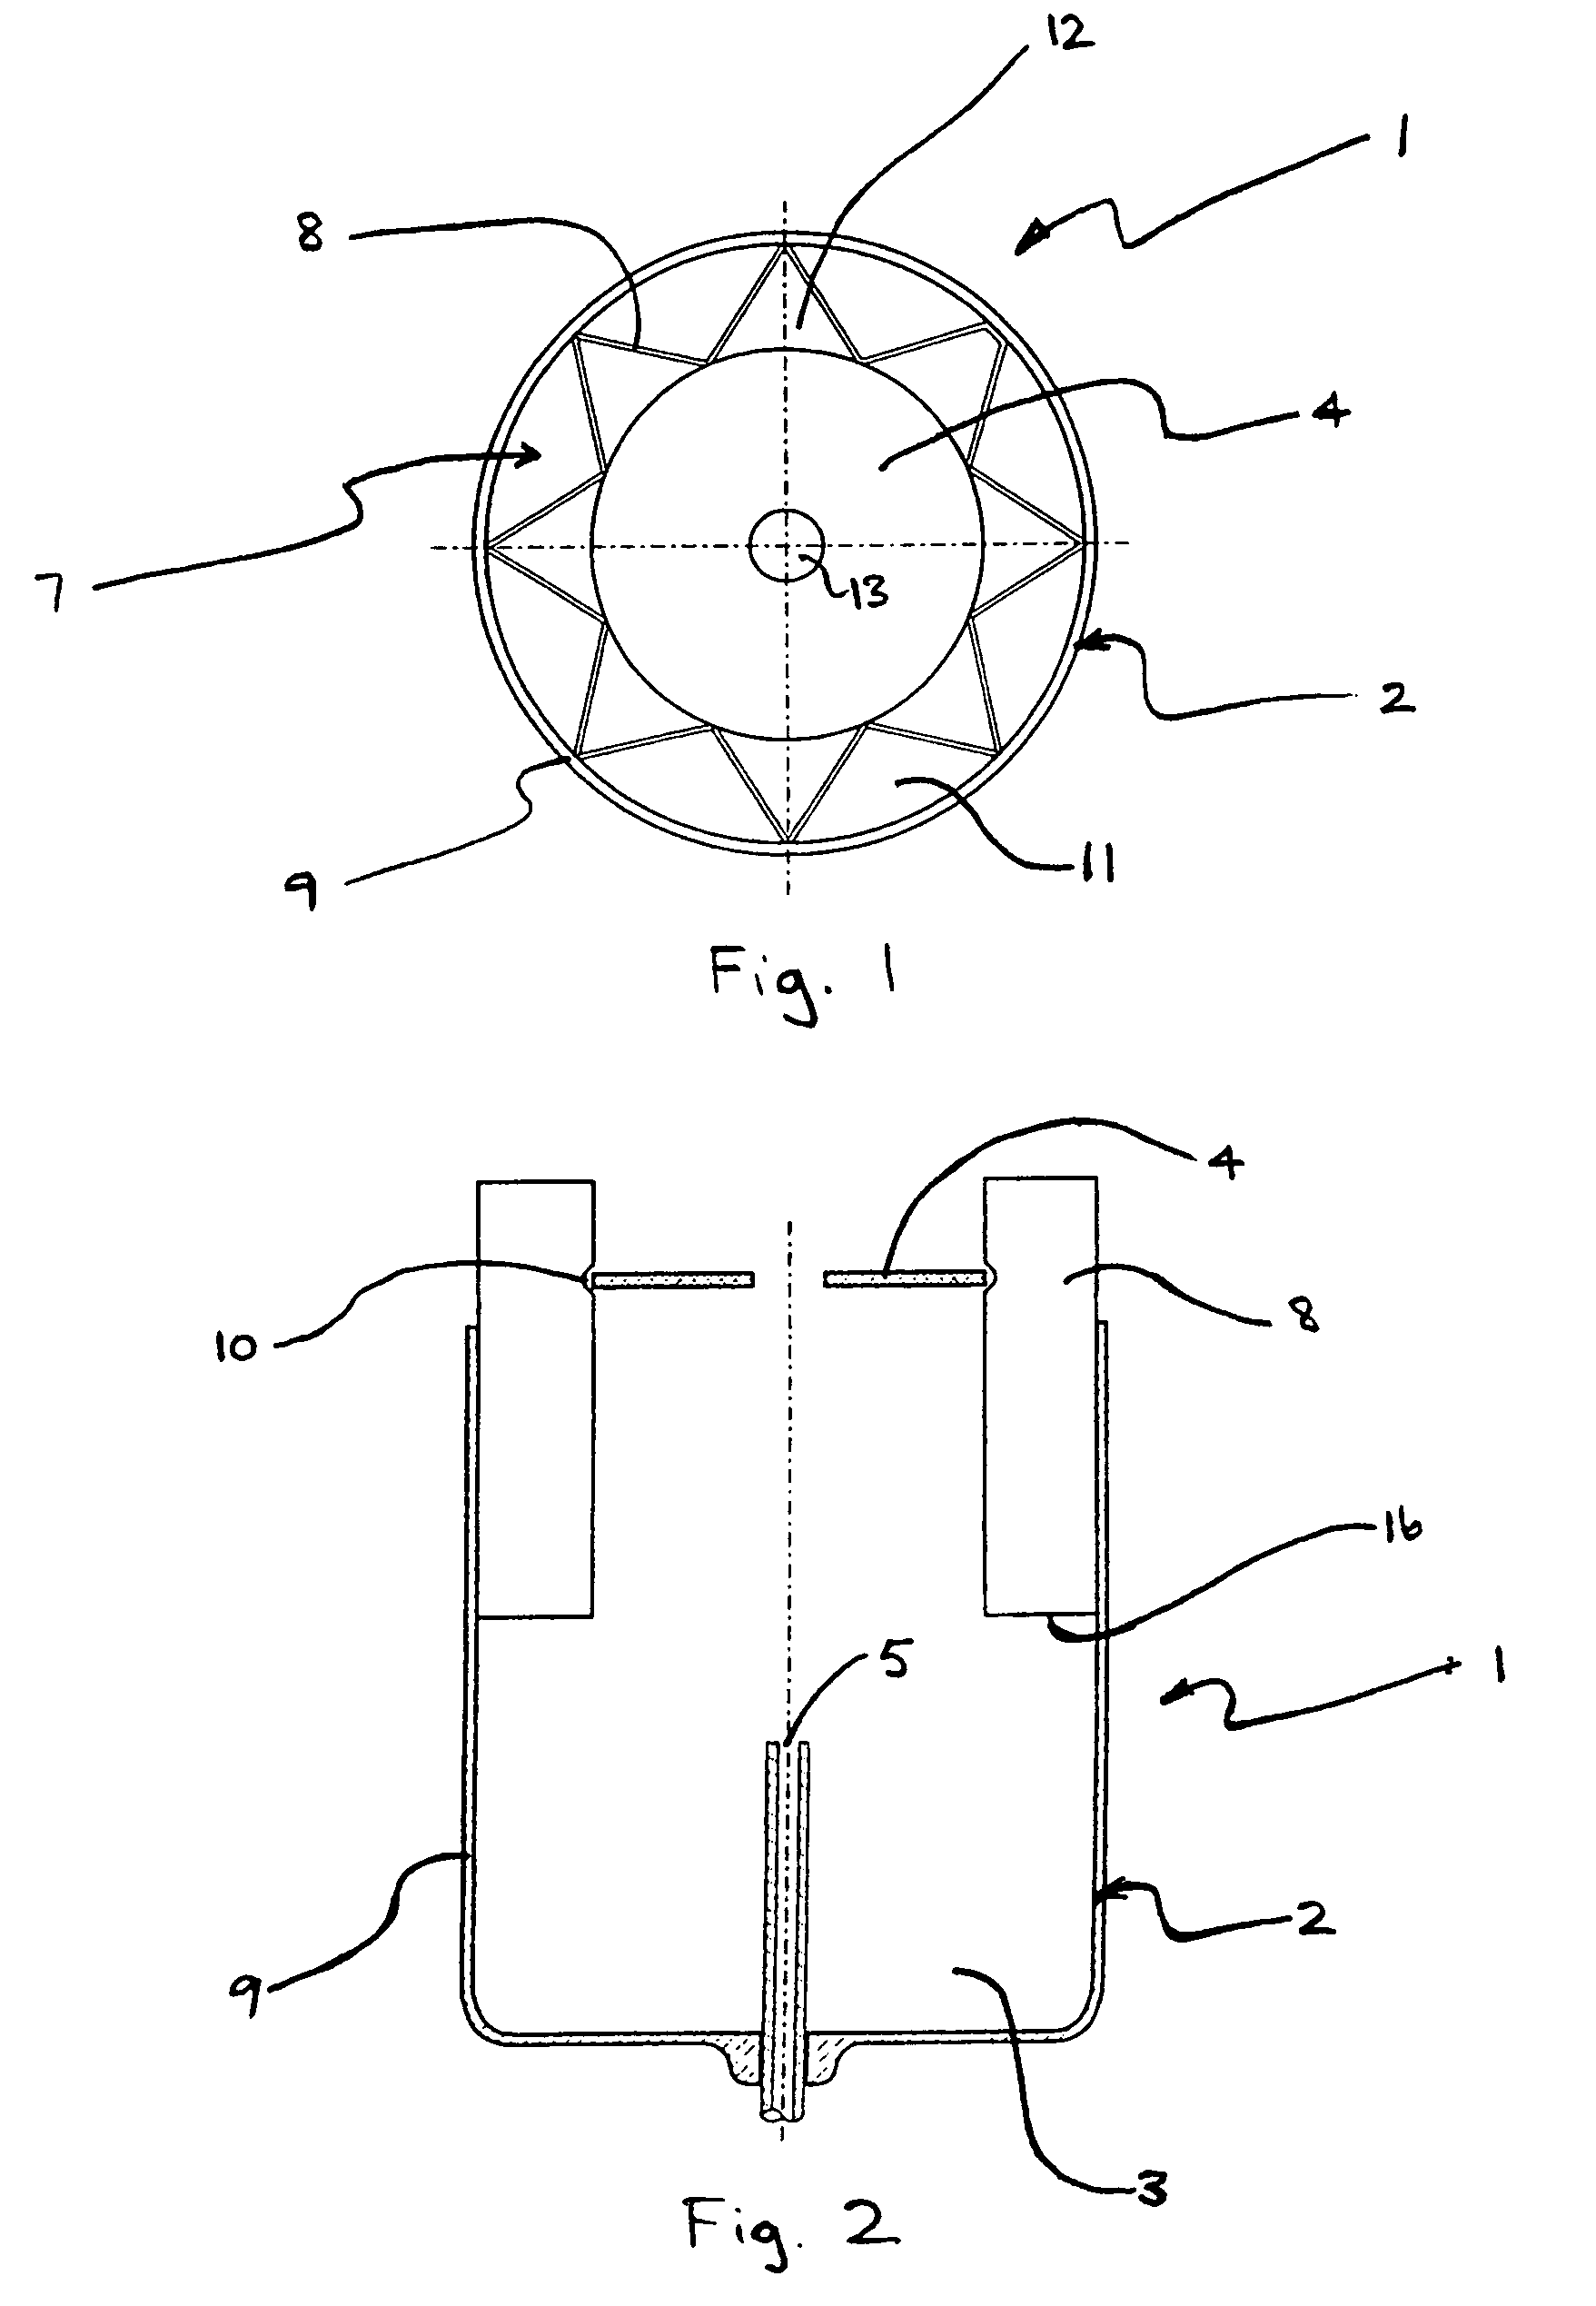 Fluid mixing device